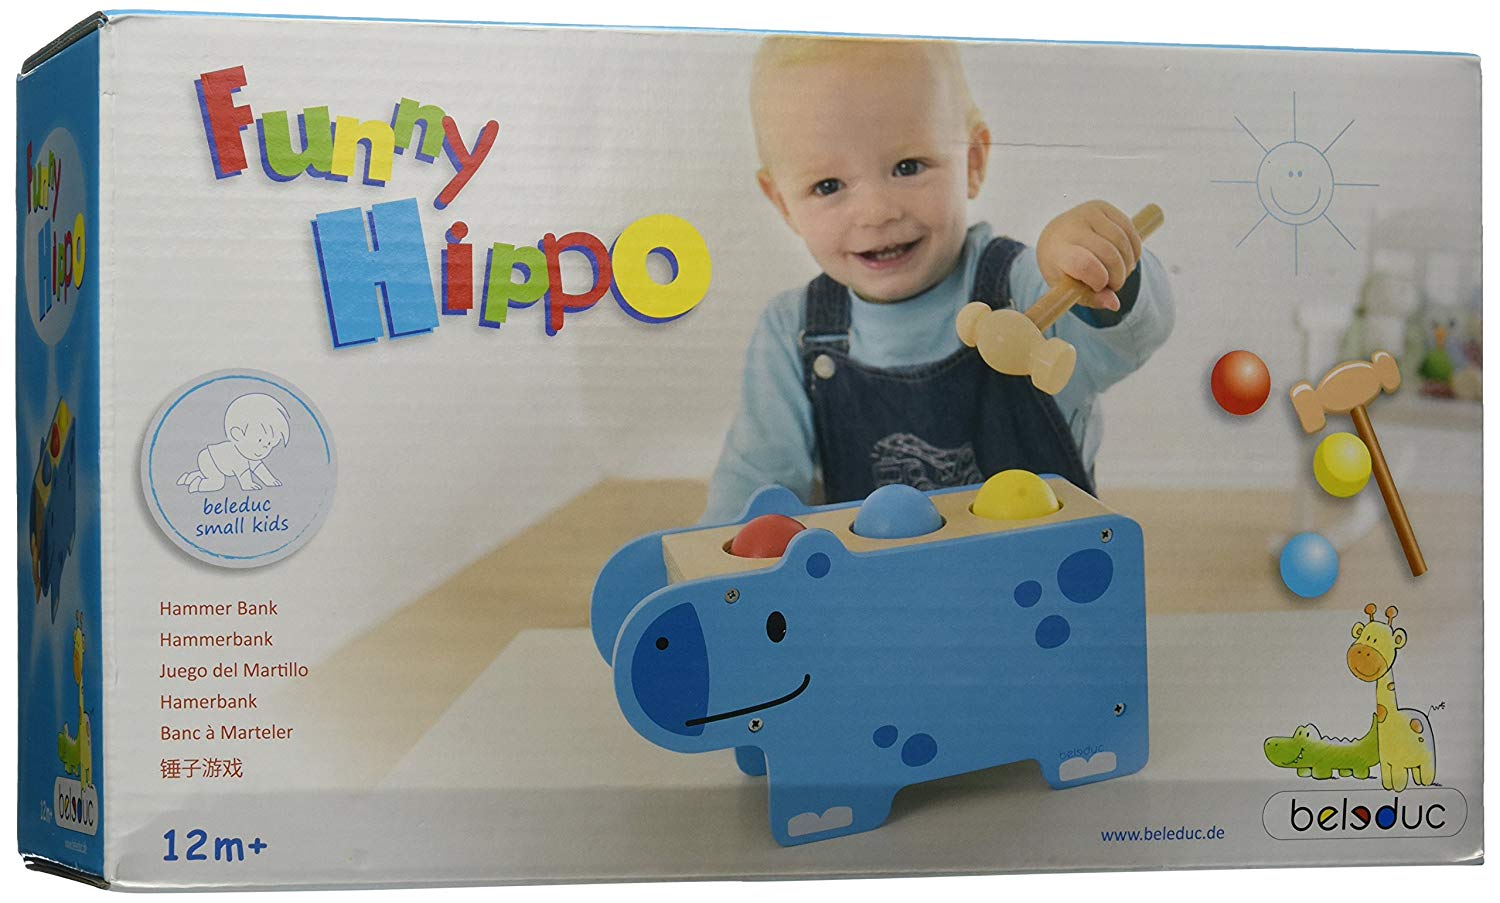 Beleduc Small Kids Funny Hippo